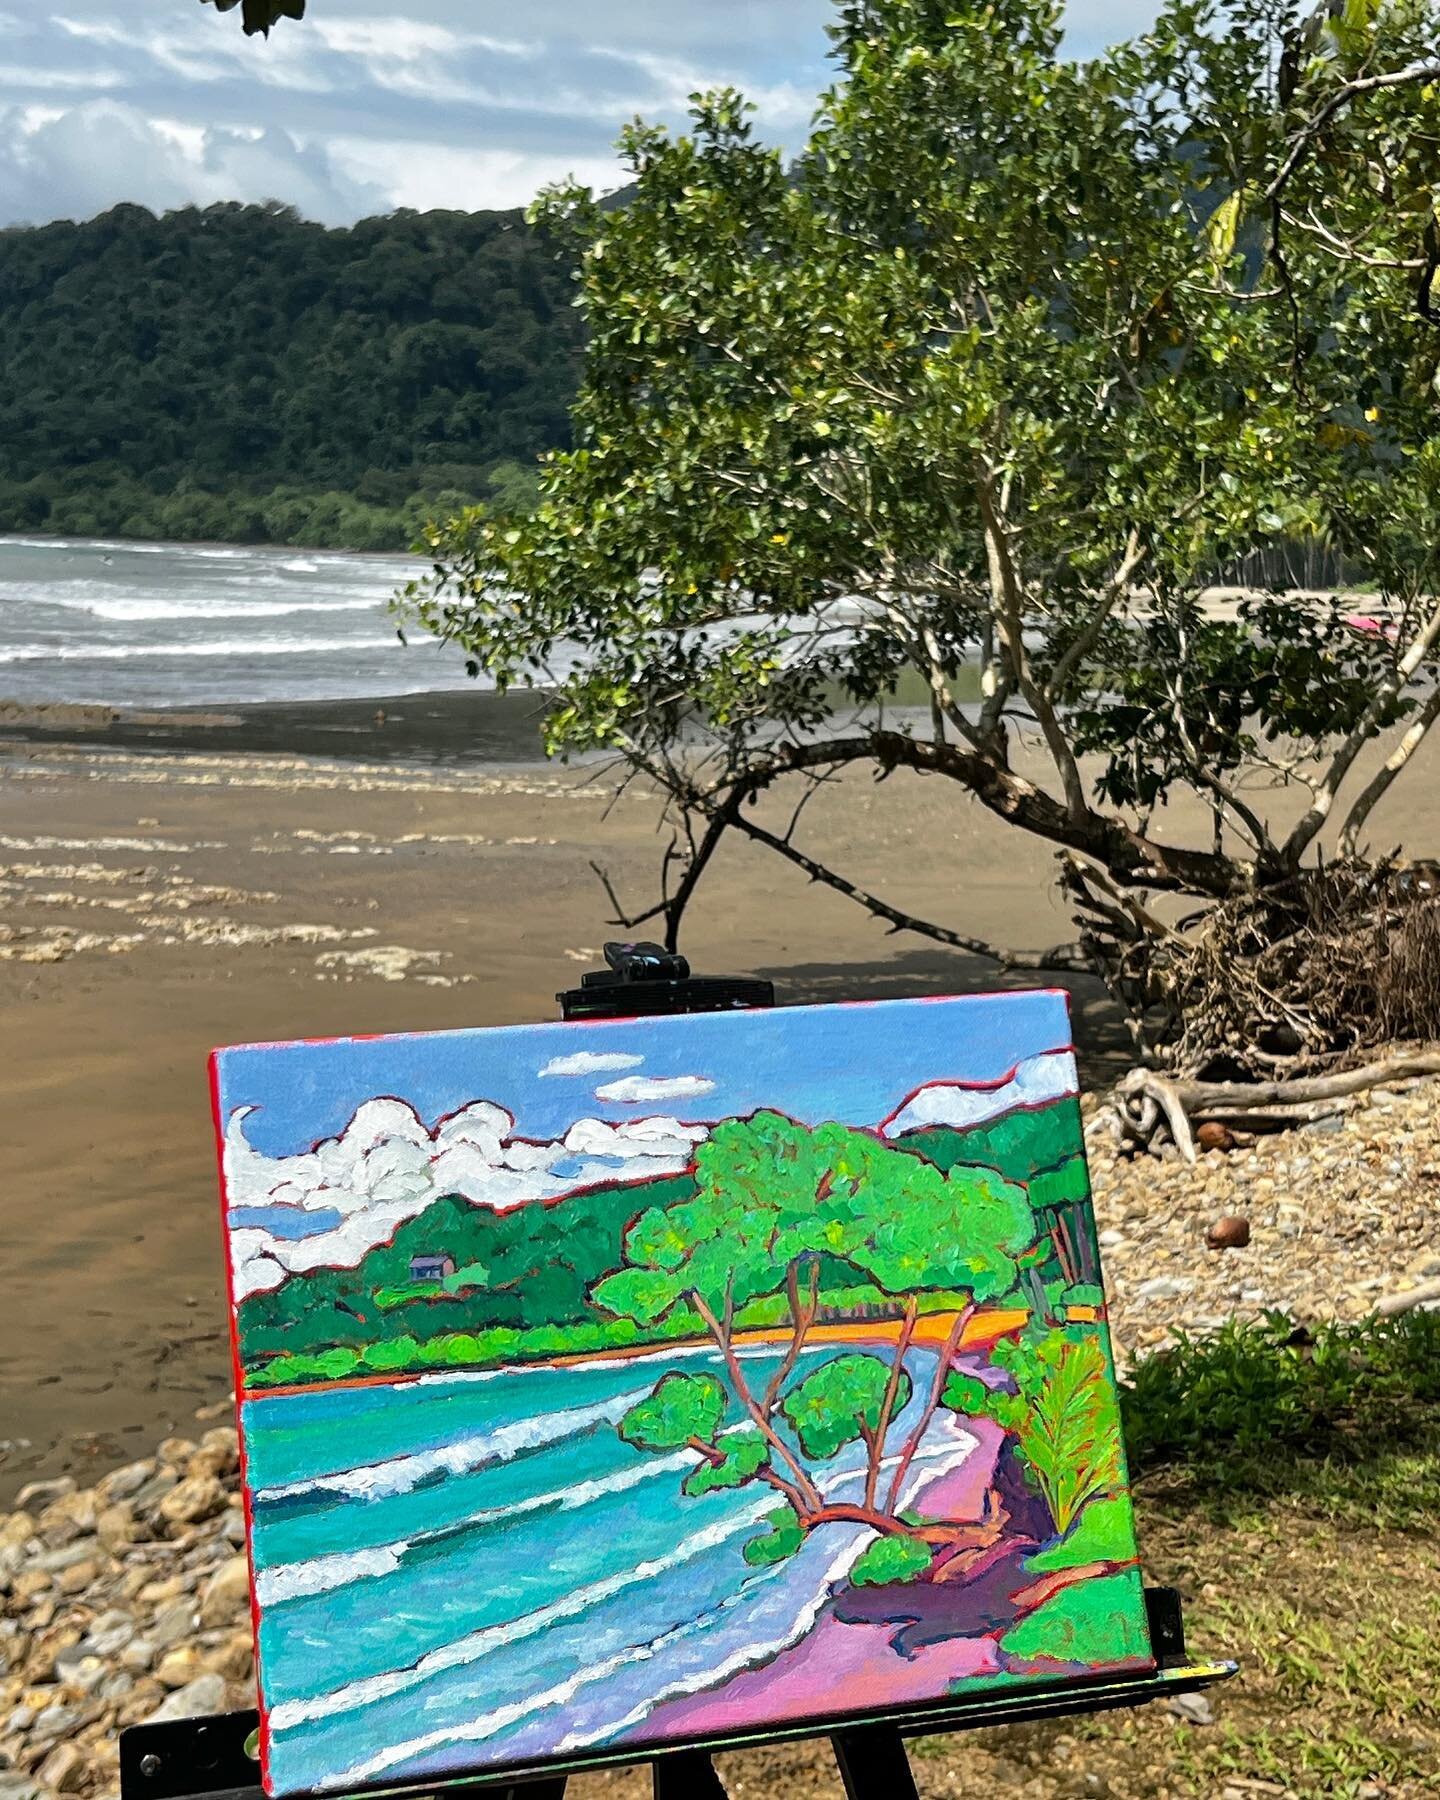 #dominica #costarica &hellip; painting this morning at playa dominicalito&hellip;  #oilpaintingonsite #paintingbeachscenes #expressionism  #landscapepainting #pleinairartist  #annegarney #fauve #fauvist #fauvism #pleinair #kansascity #colorist #domin